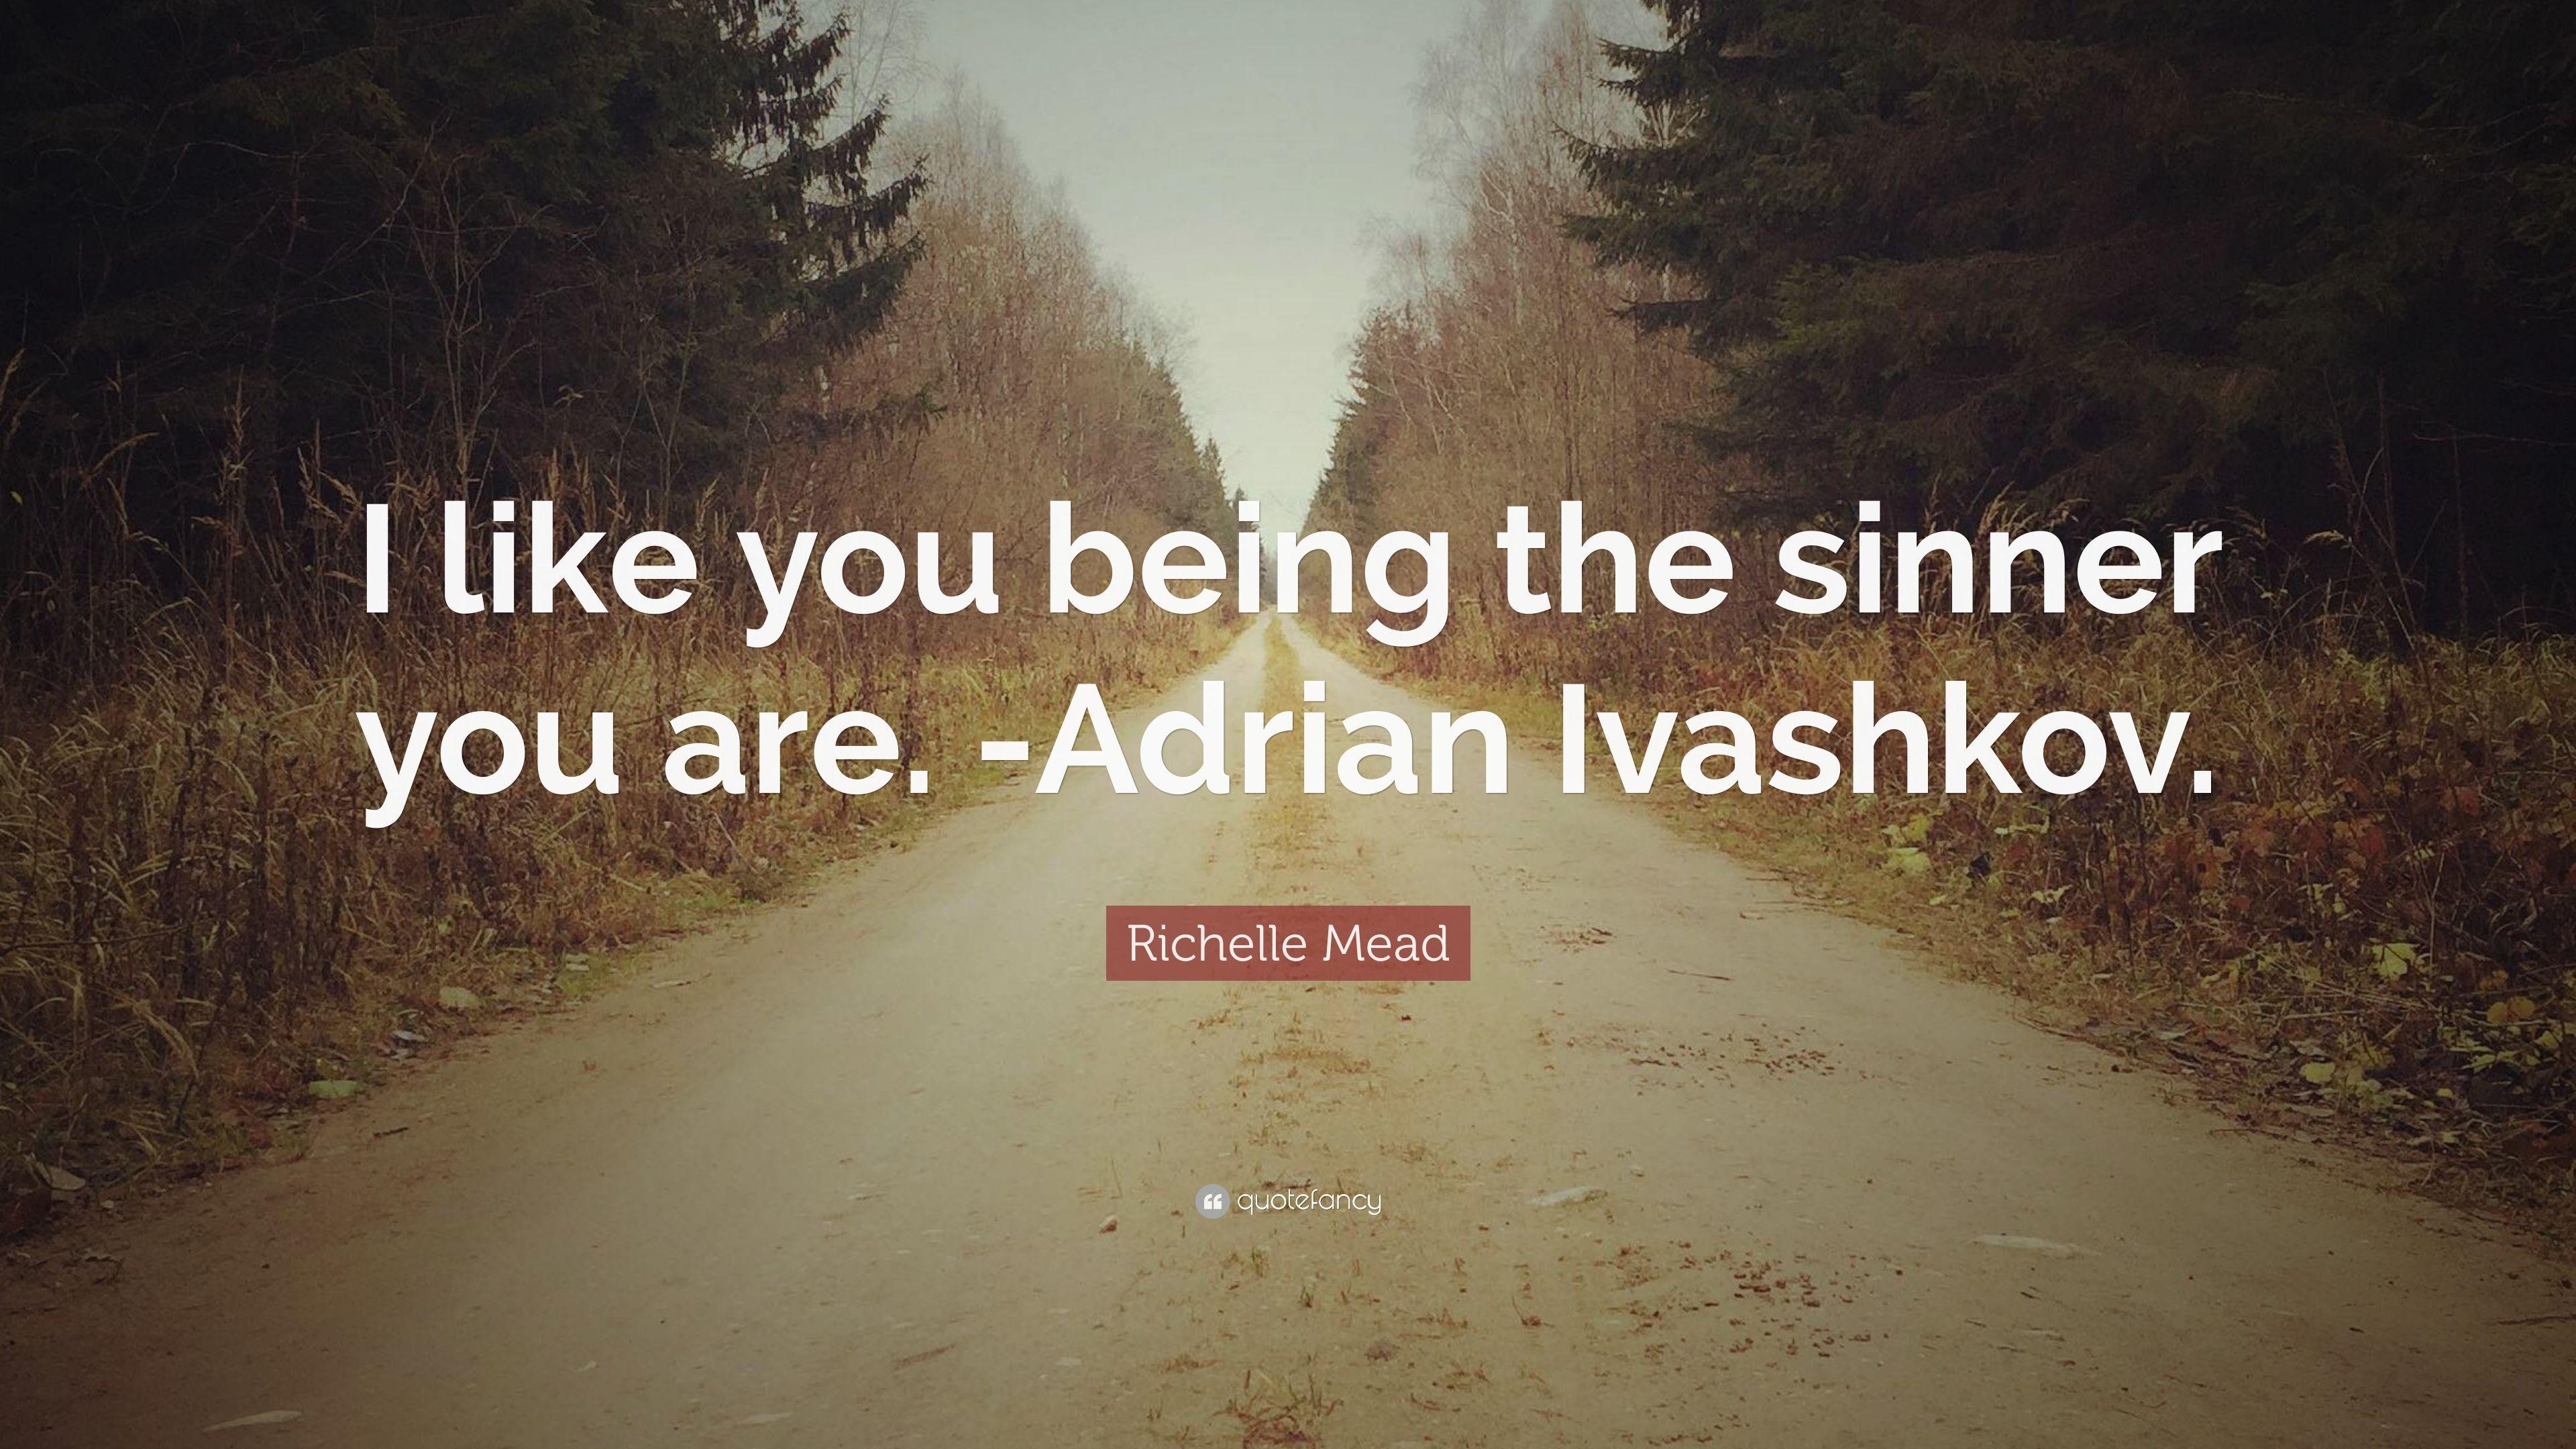 Richelle Mead Quote: “I like you being the sinner you are. -Adrian